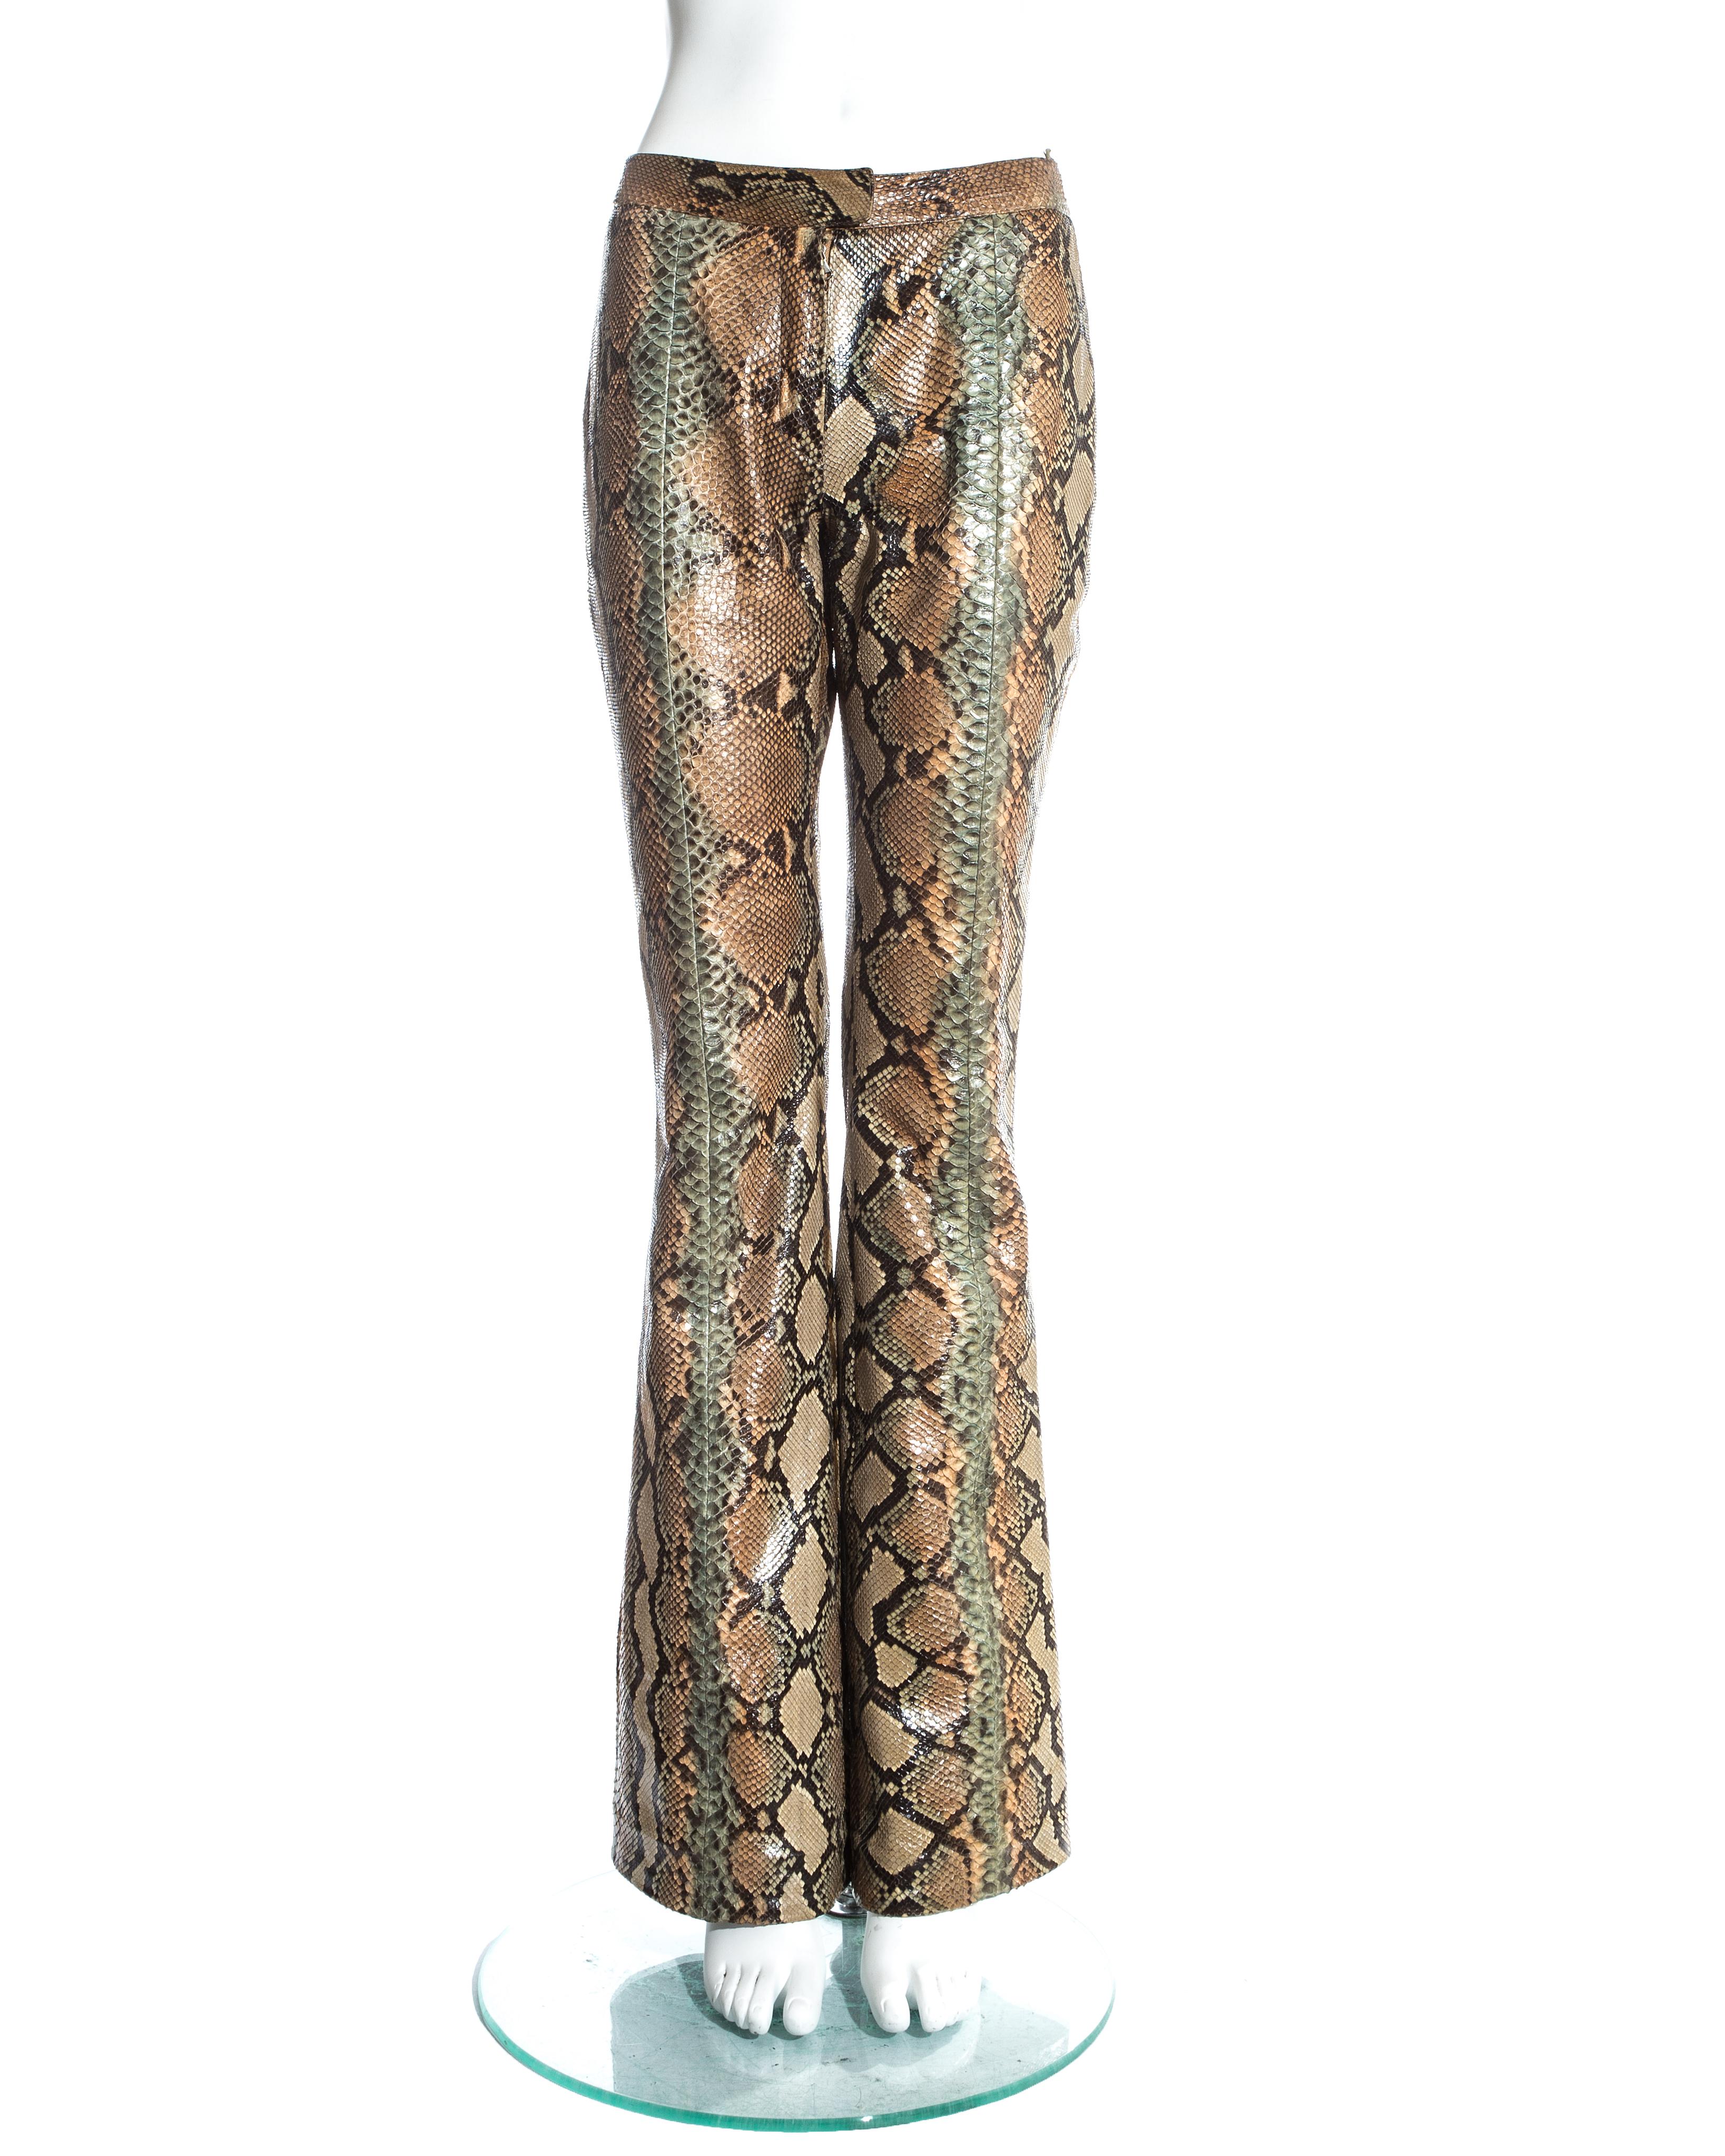 Gucci by Tom Ford, Tan python snakeskin flared pants.

Spring-Summer 2000